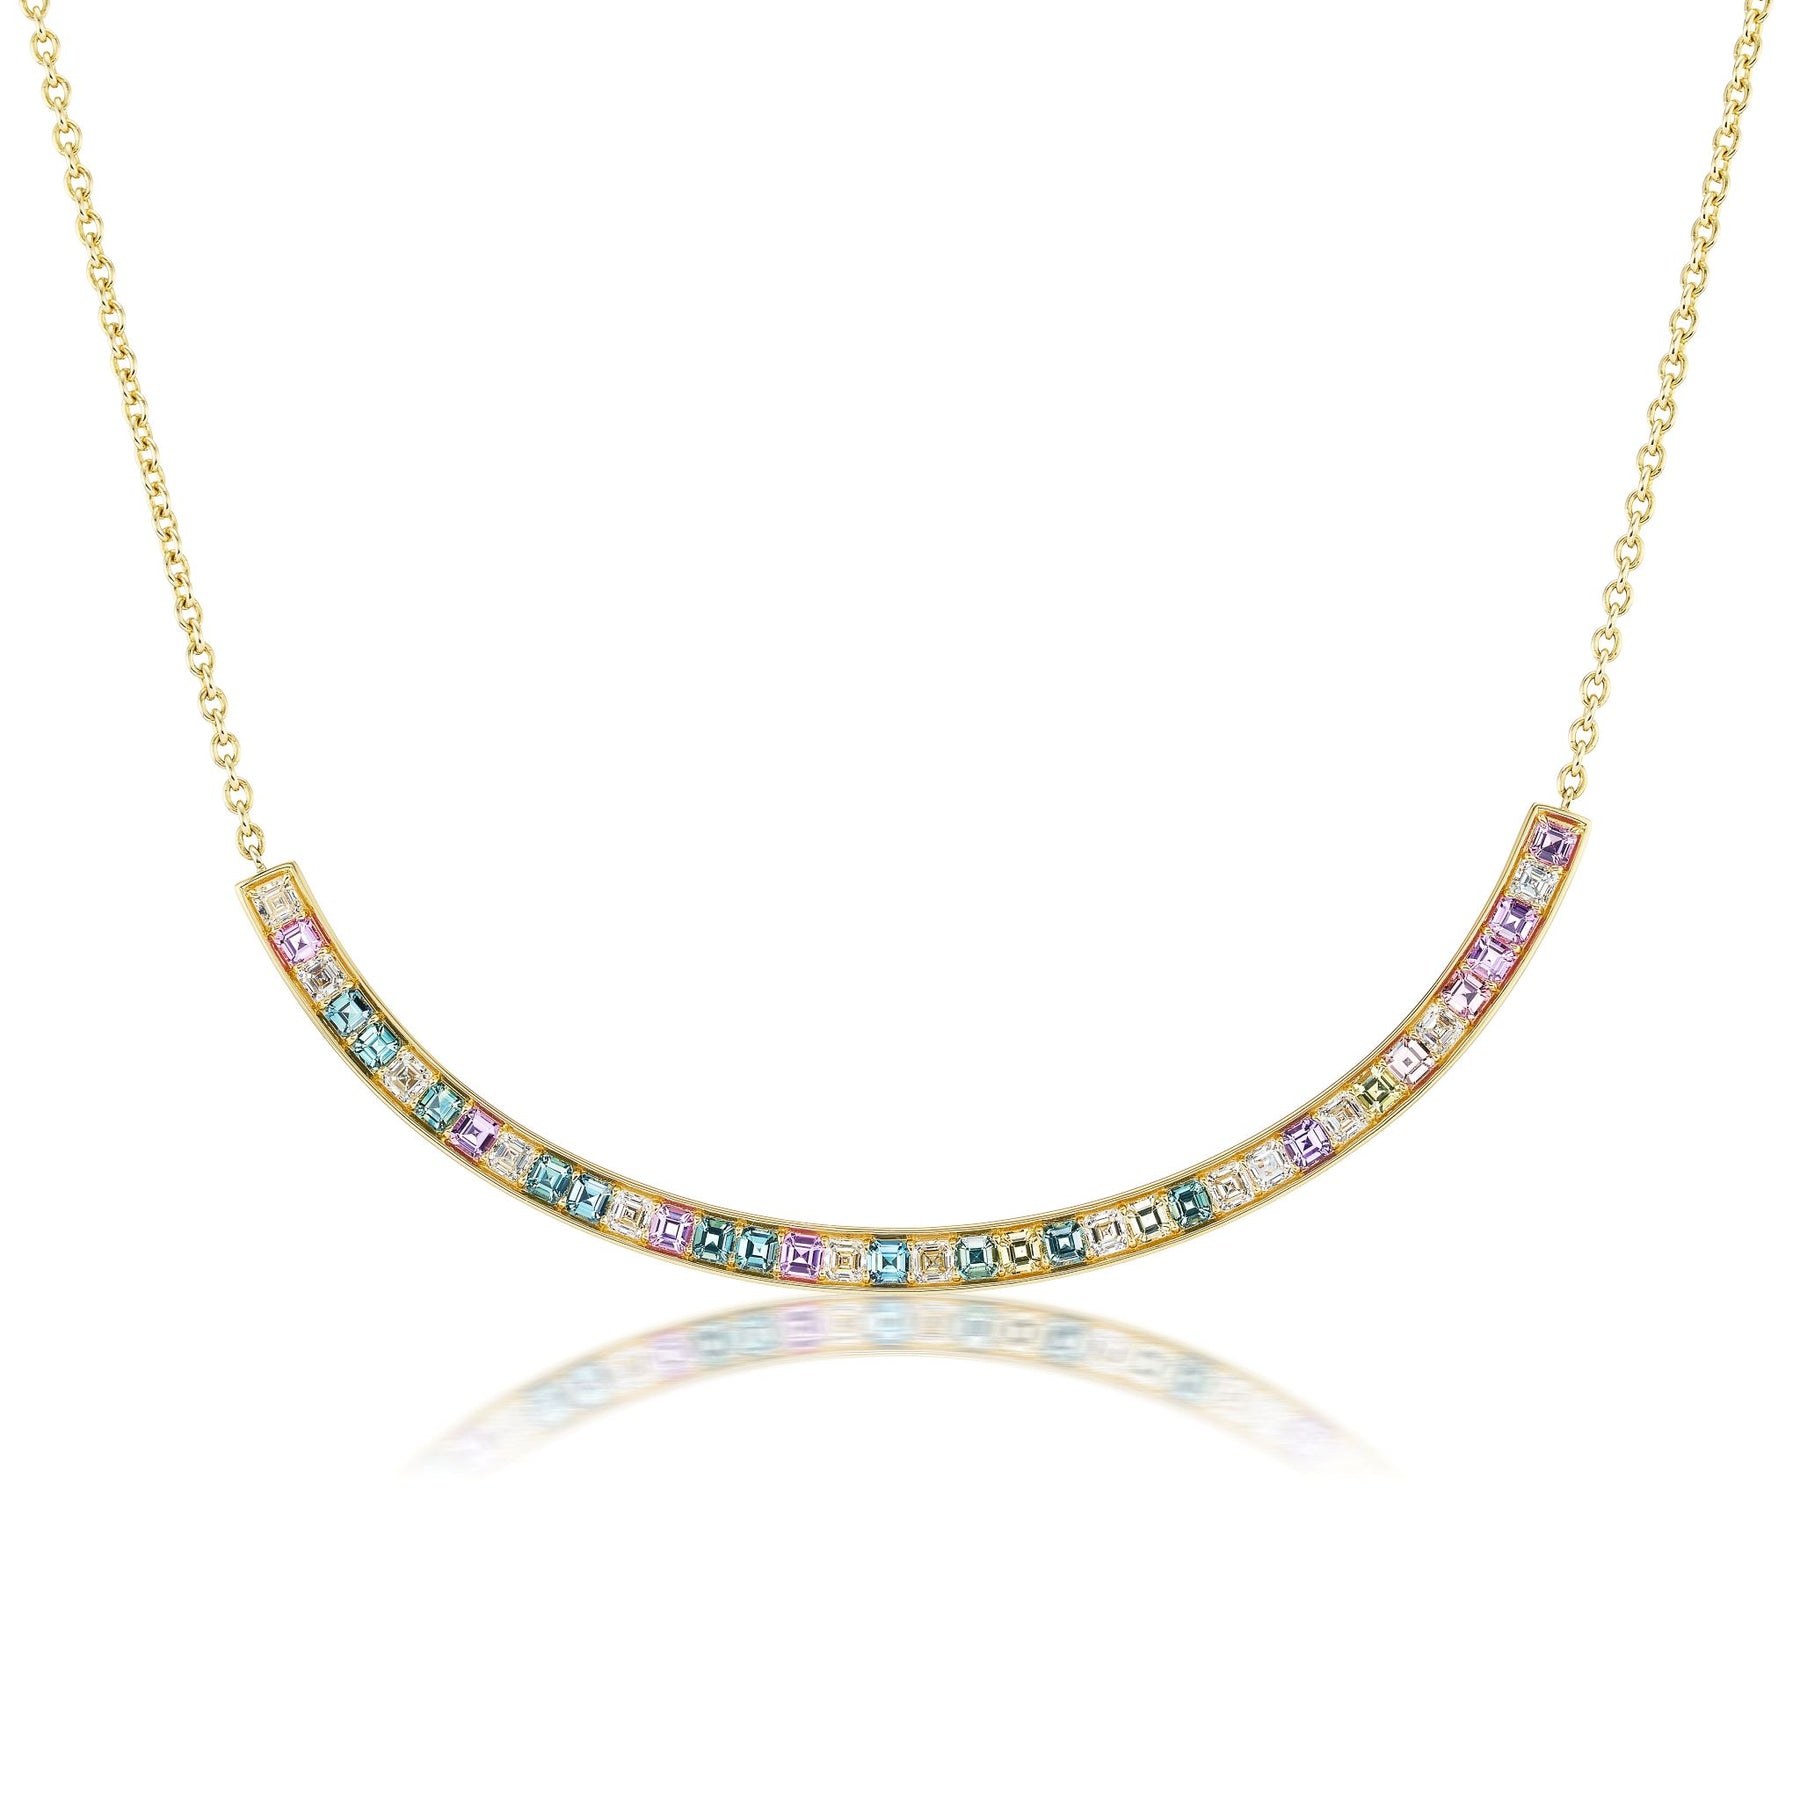 Ombré Smile Bar Necklace in Yellow Gold with Asscher Cut Diamonds and Multicolor Sapphires